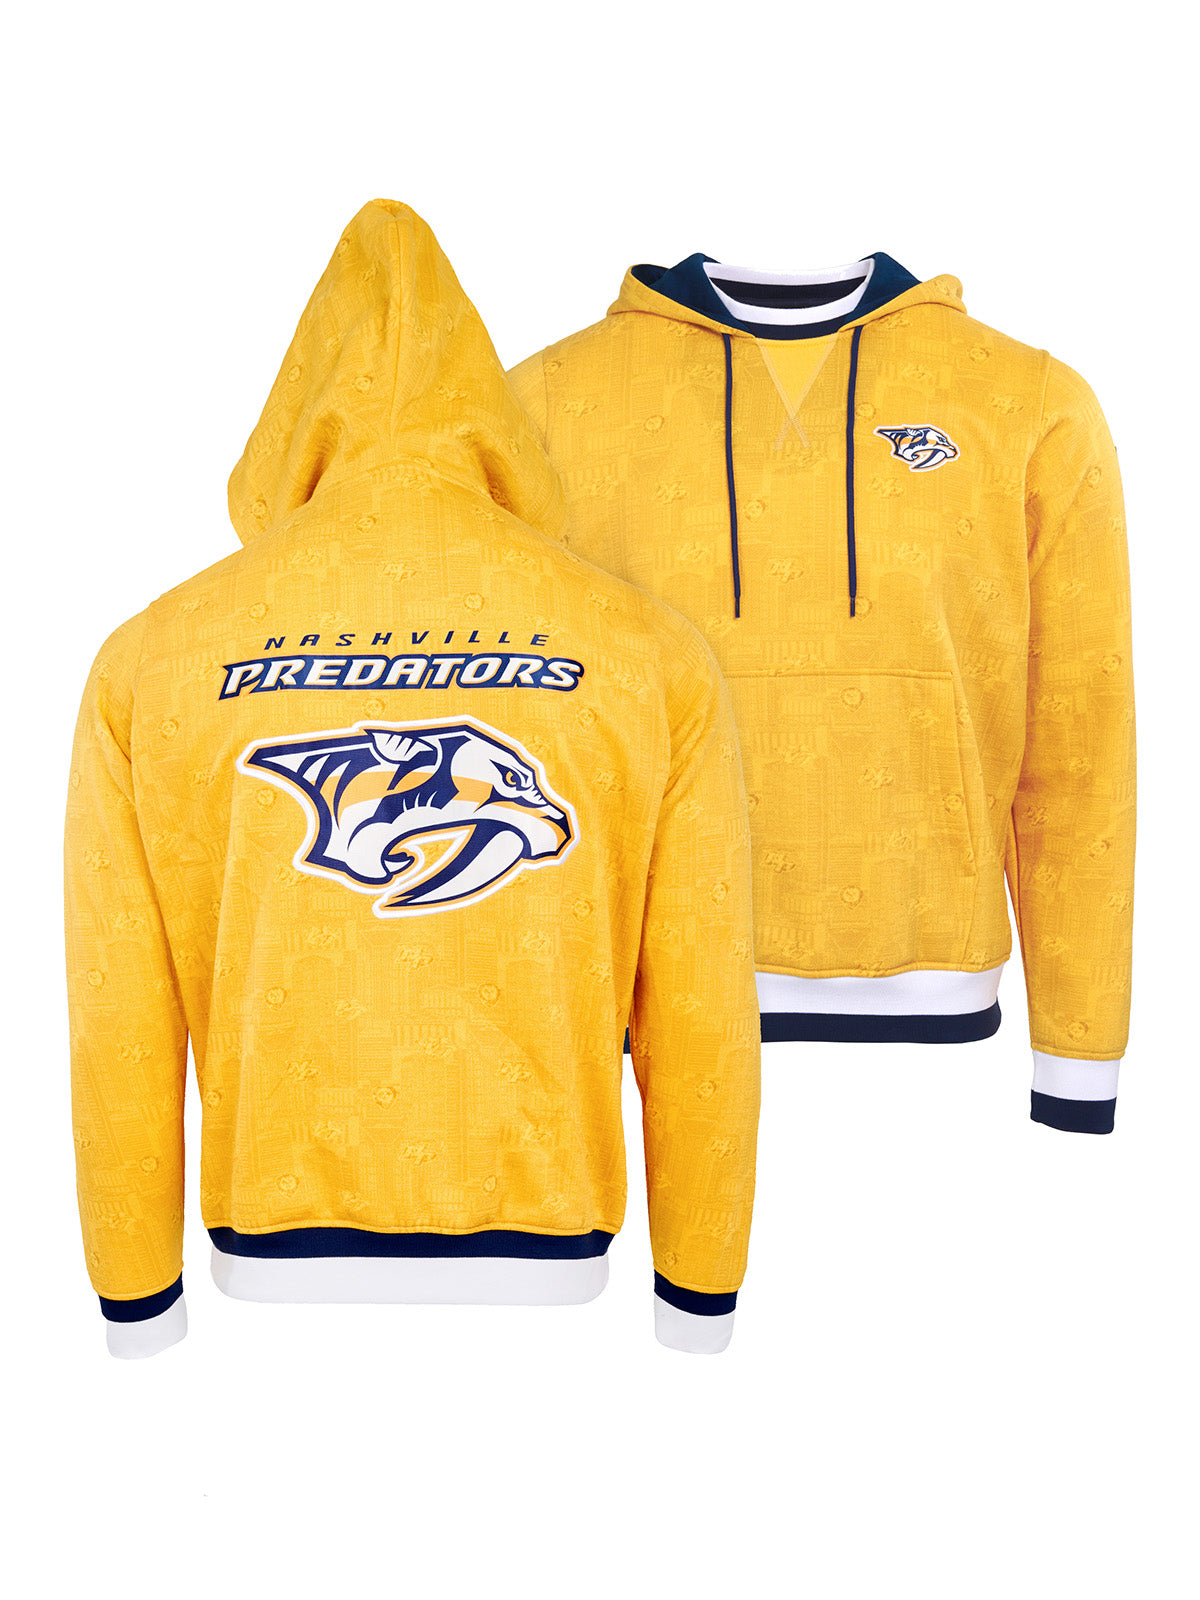 Nashville Predators Hoodie - Show your team spirit, with the iconic team logo patch on the front and back, and proudly display your Nashville Predators support in their team colors with this NHL hockey hoodie.